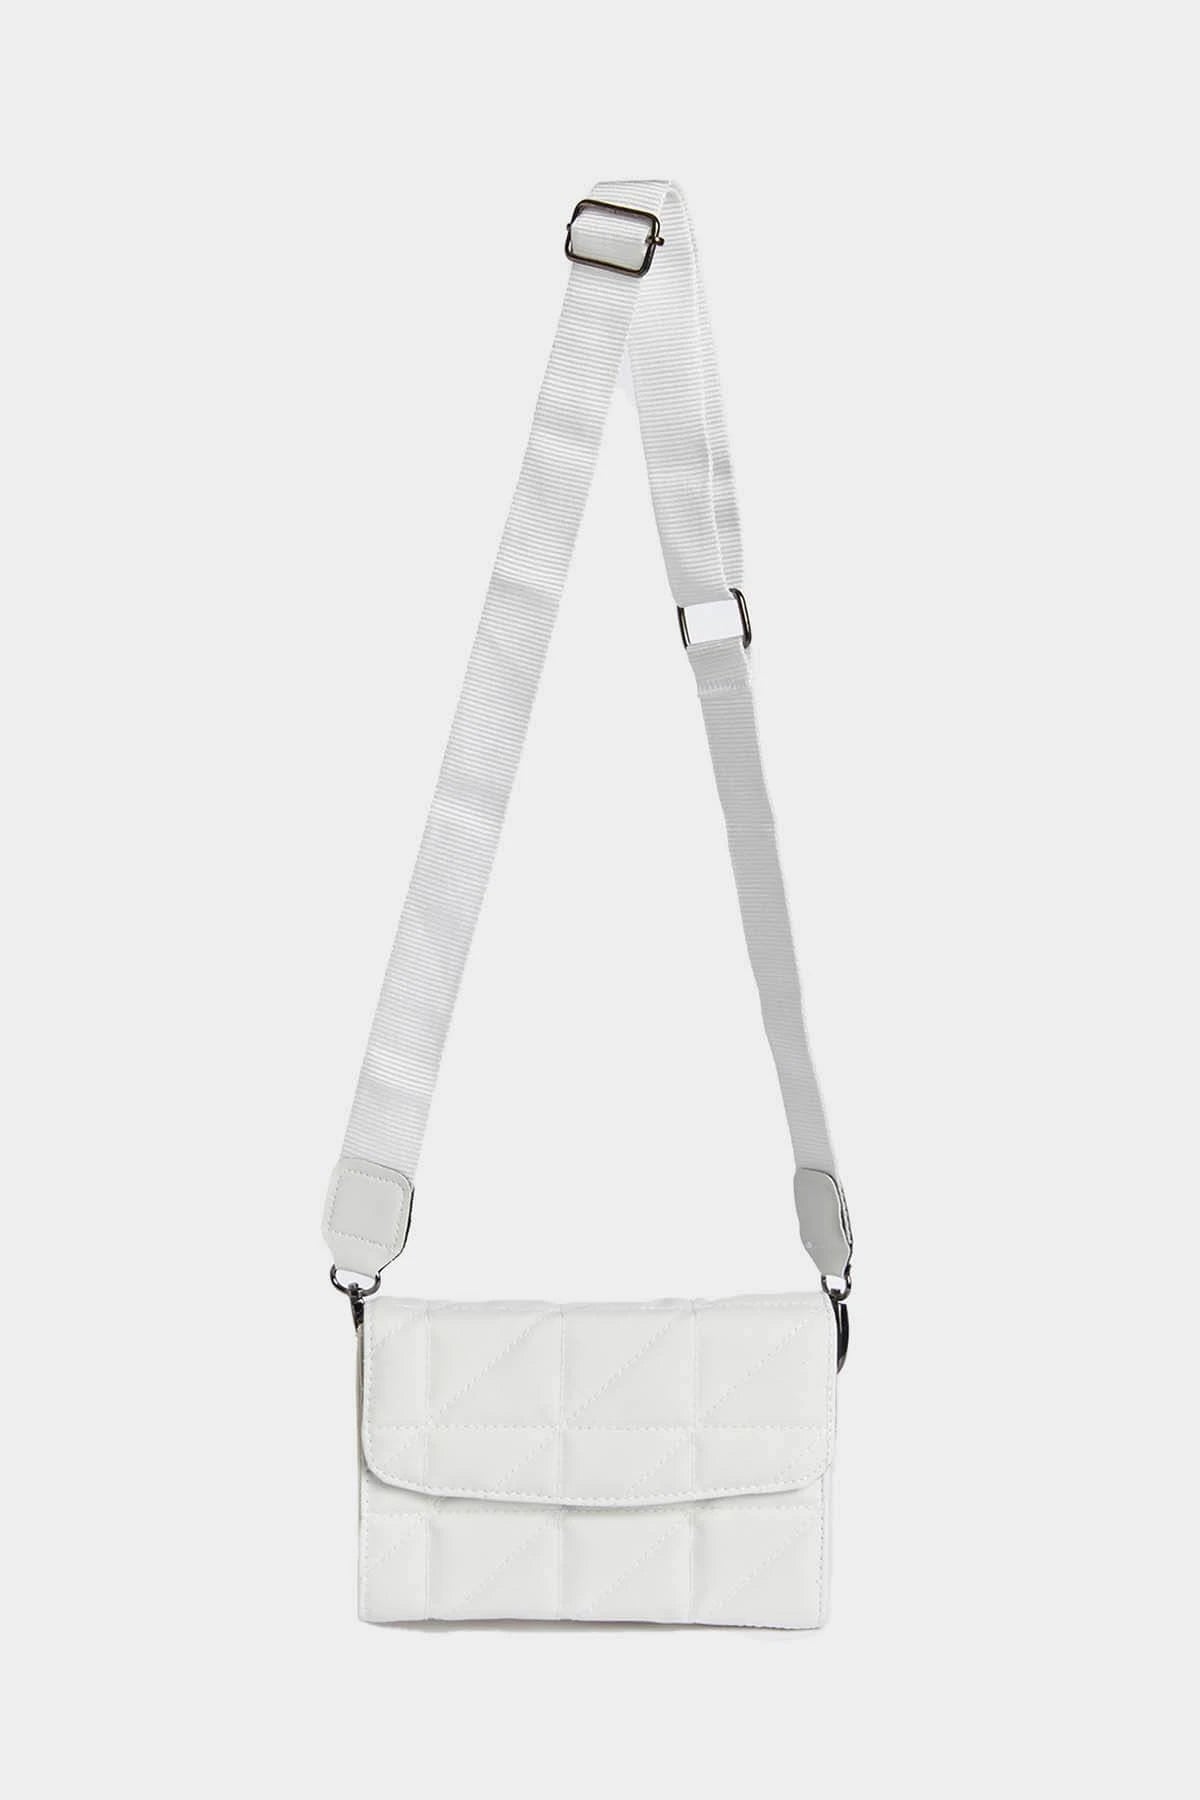 Quilted Stitched Covered Bag crossbody bag LUNARITY GARAGE Gray  